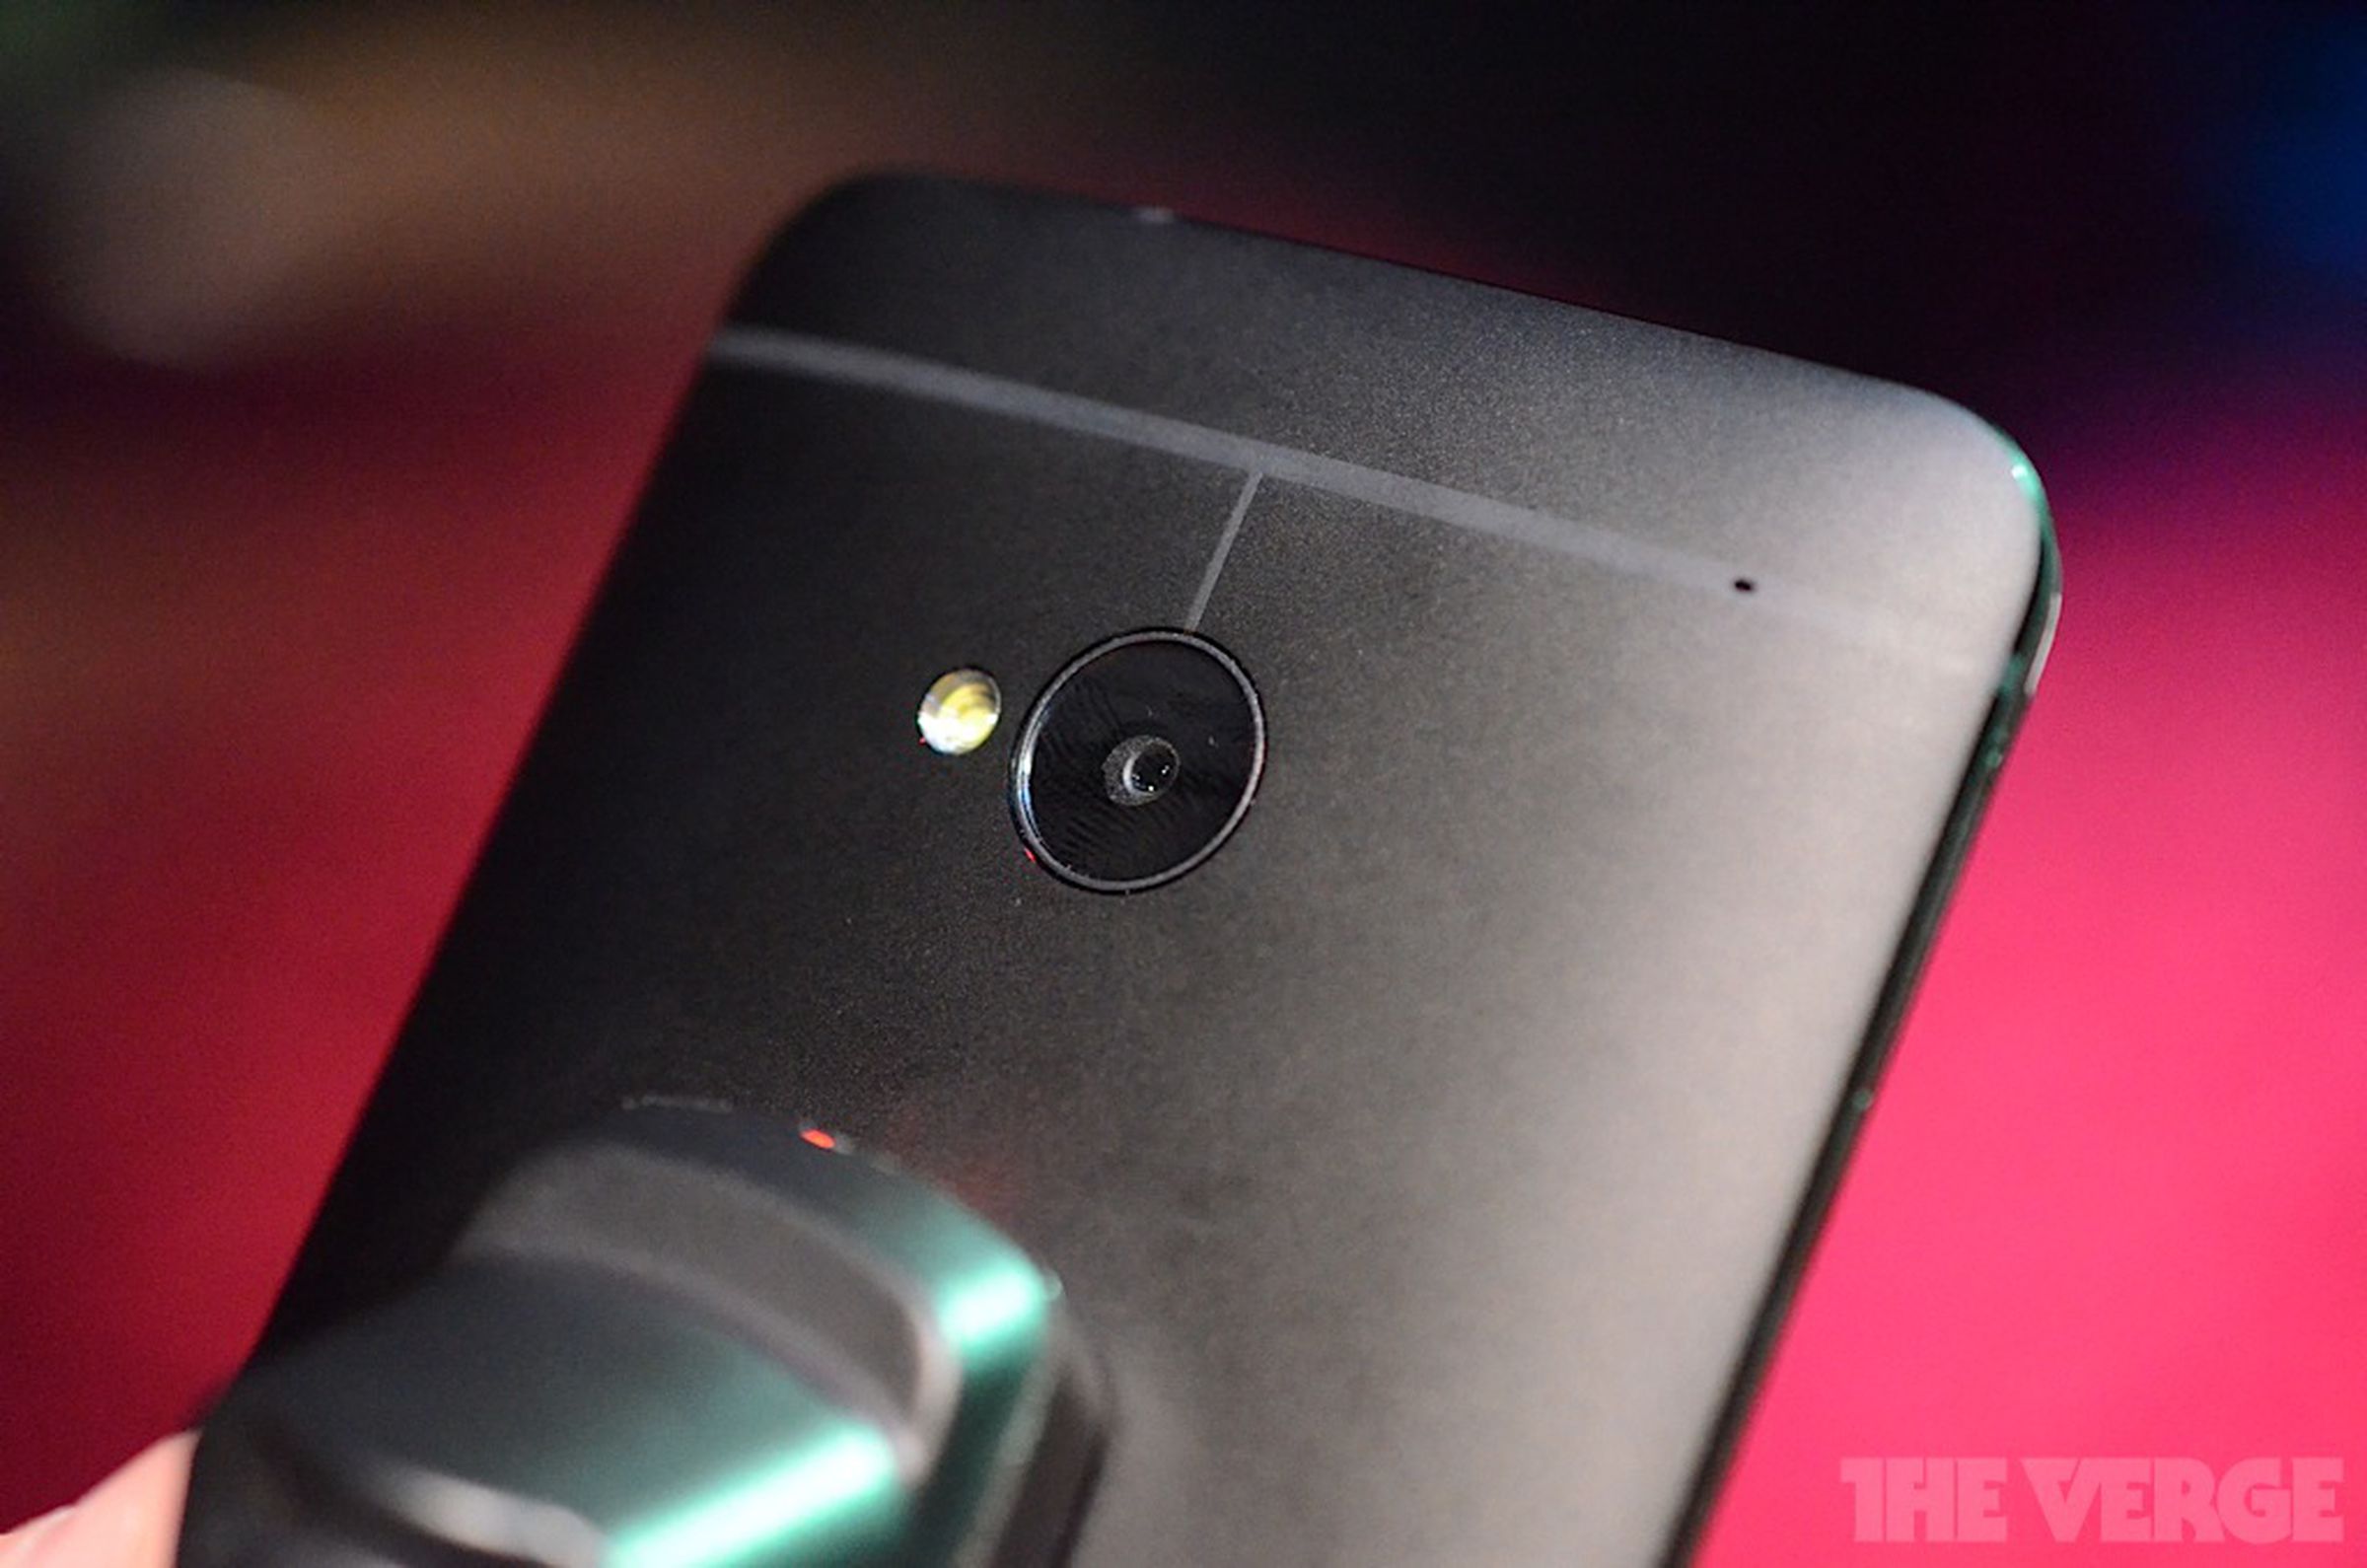 HTC One hands-on photos